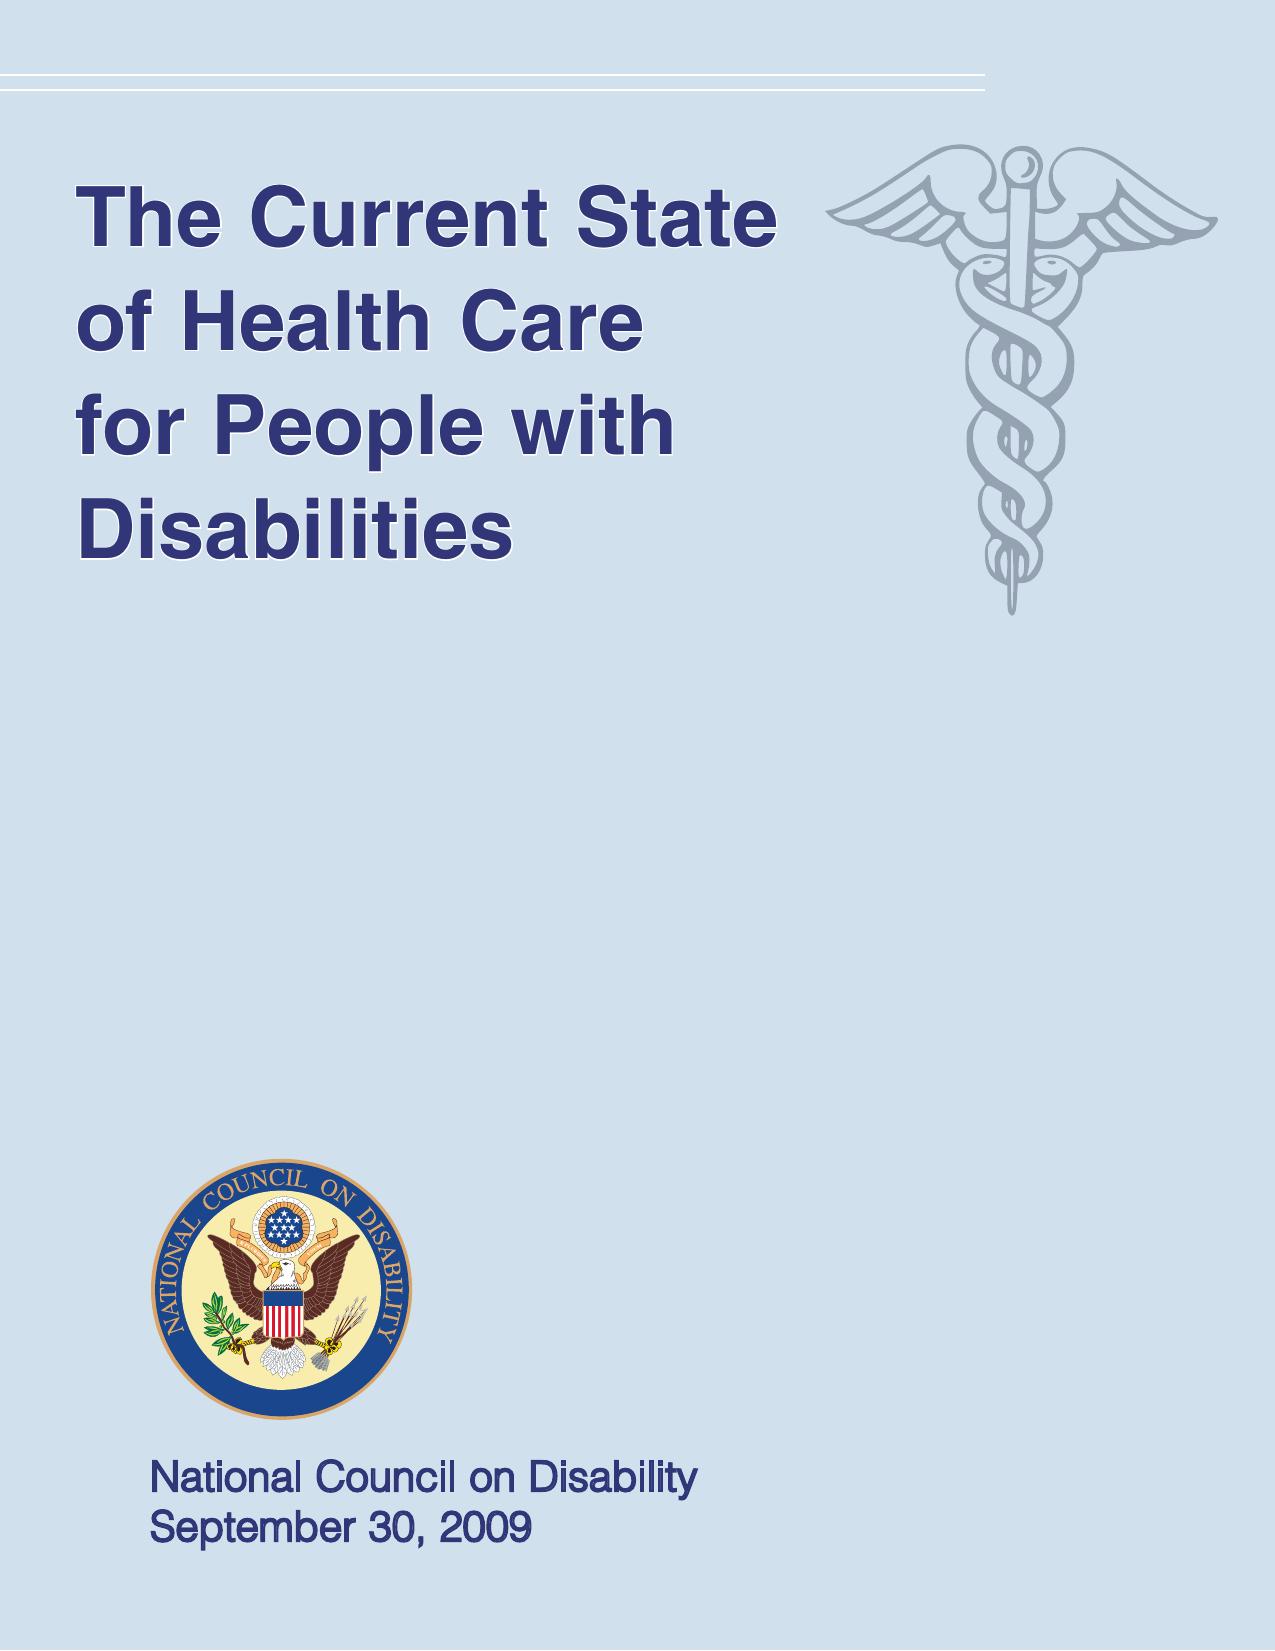 The Current State of Health Care for People with Disabilities